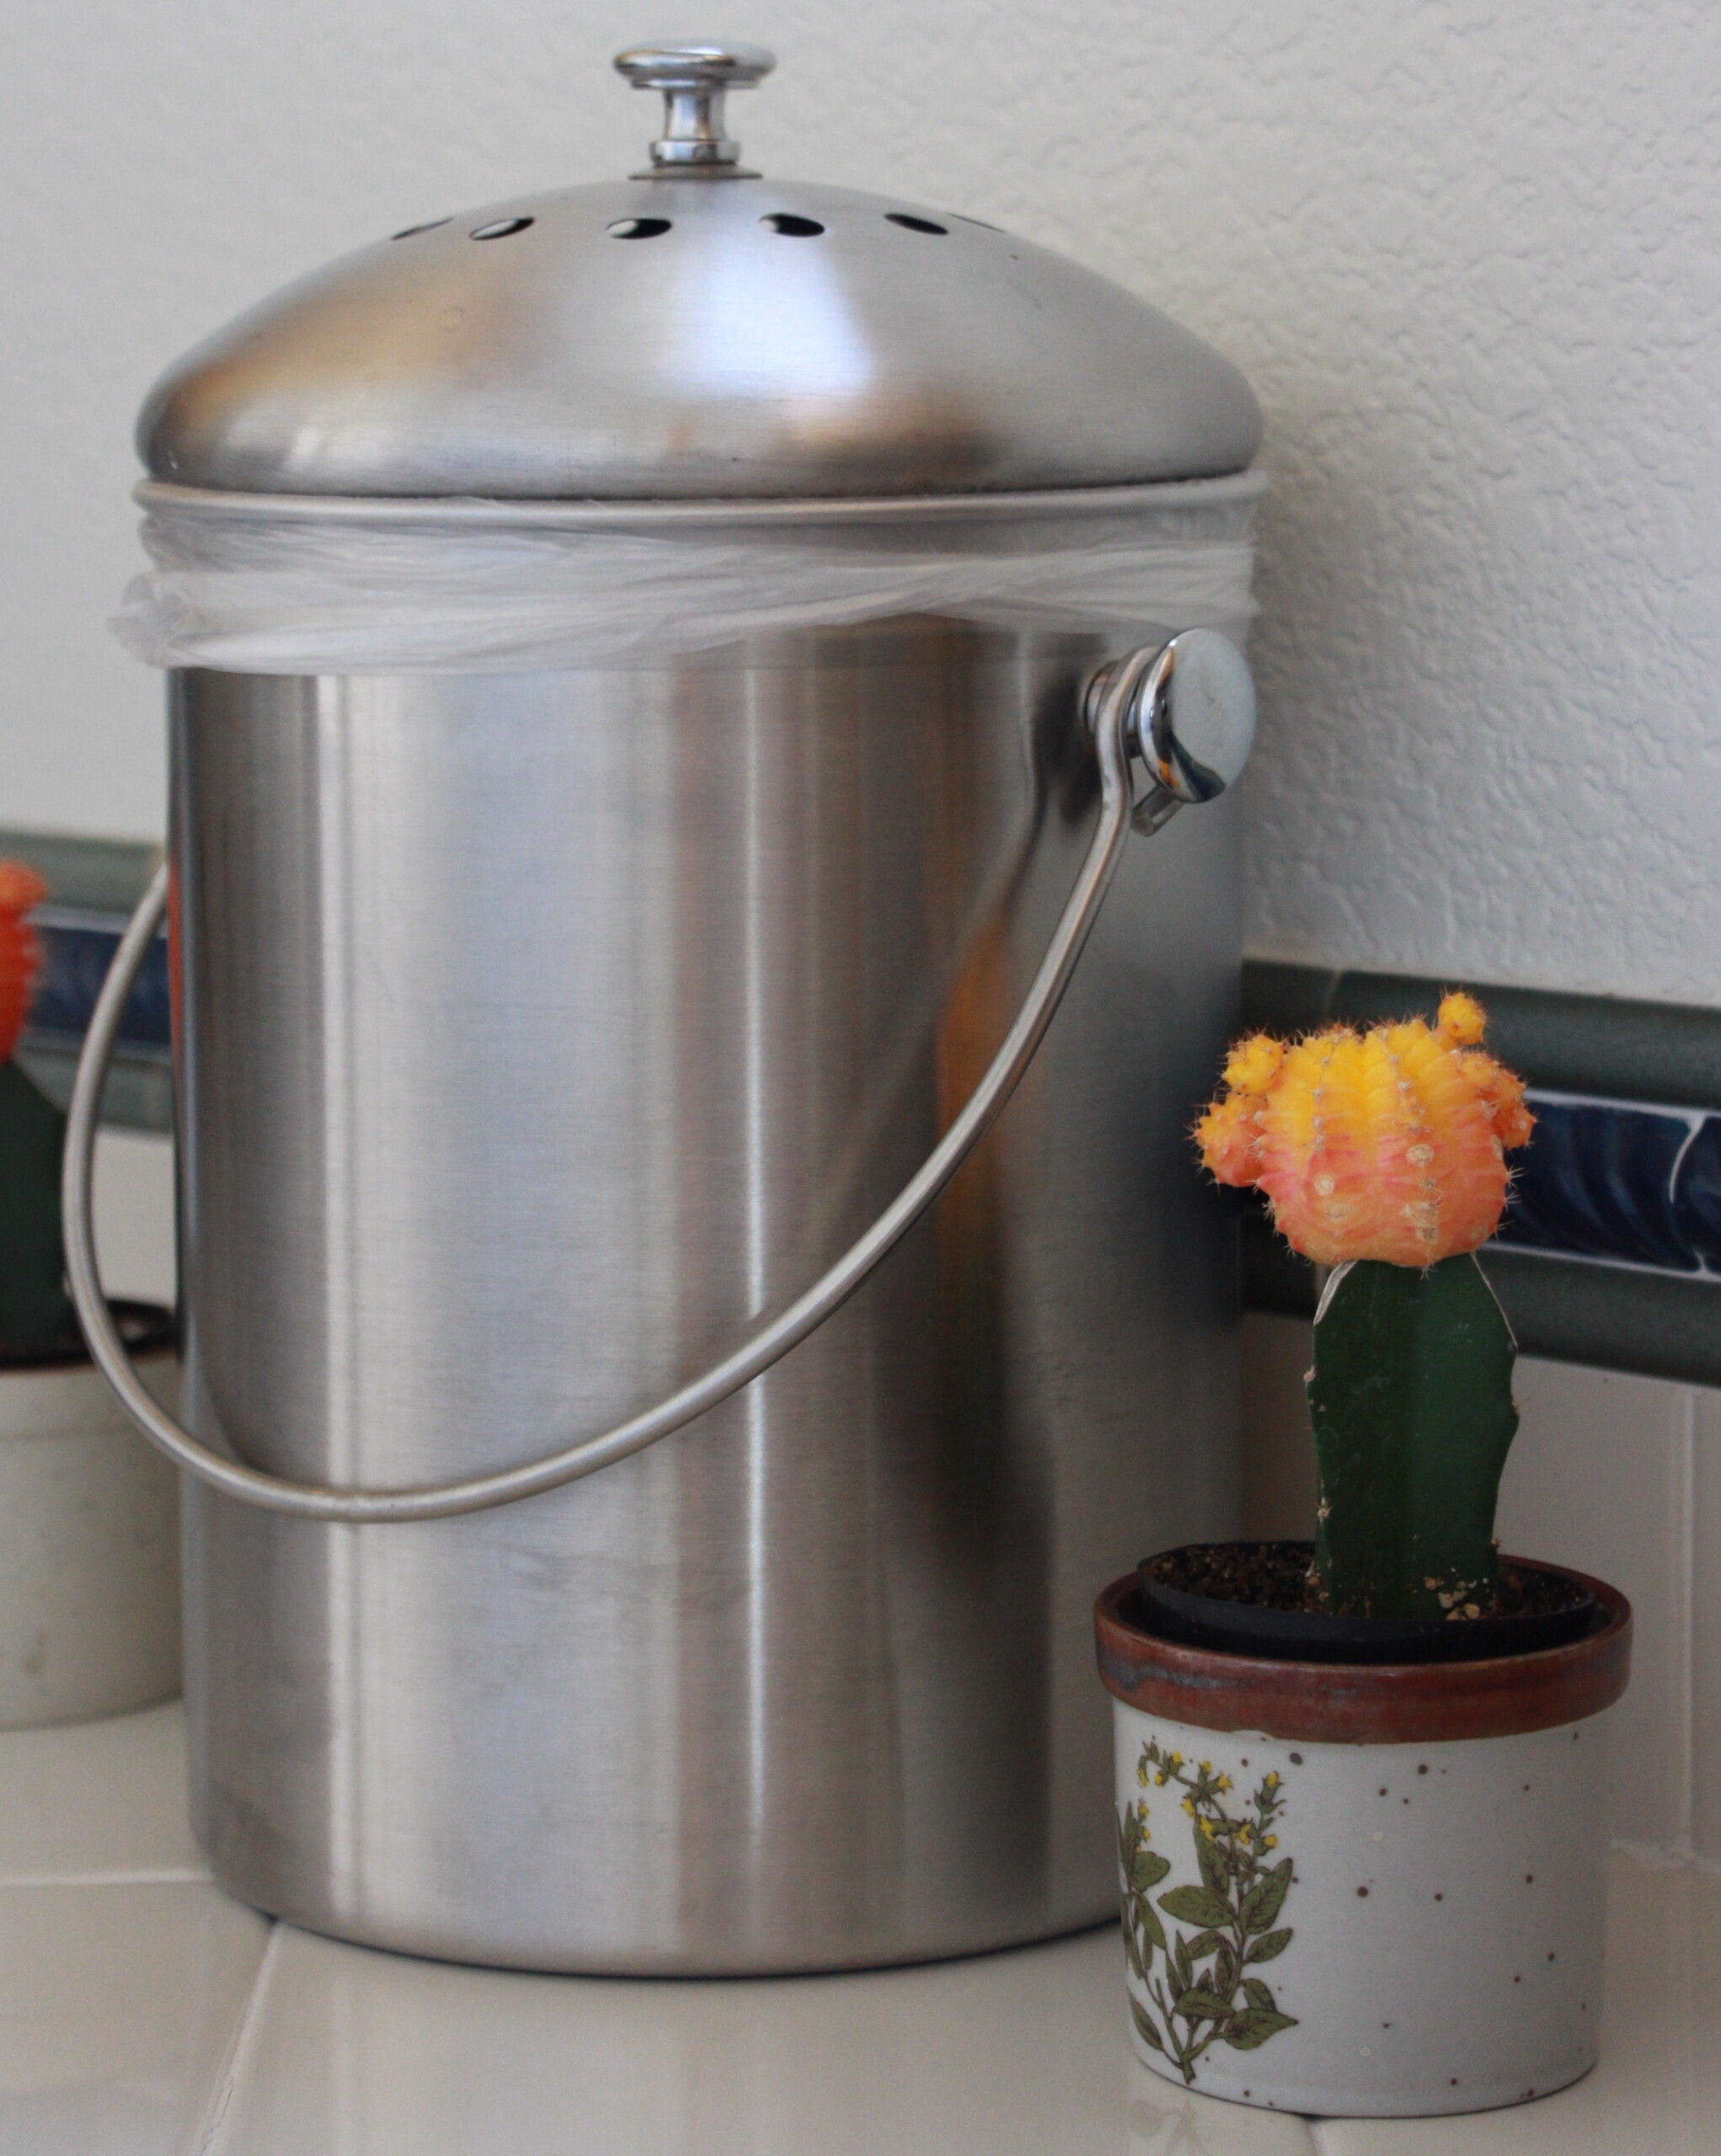 Compost pail by Lola's Cocina